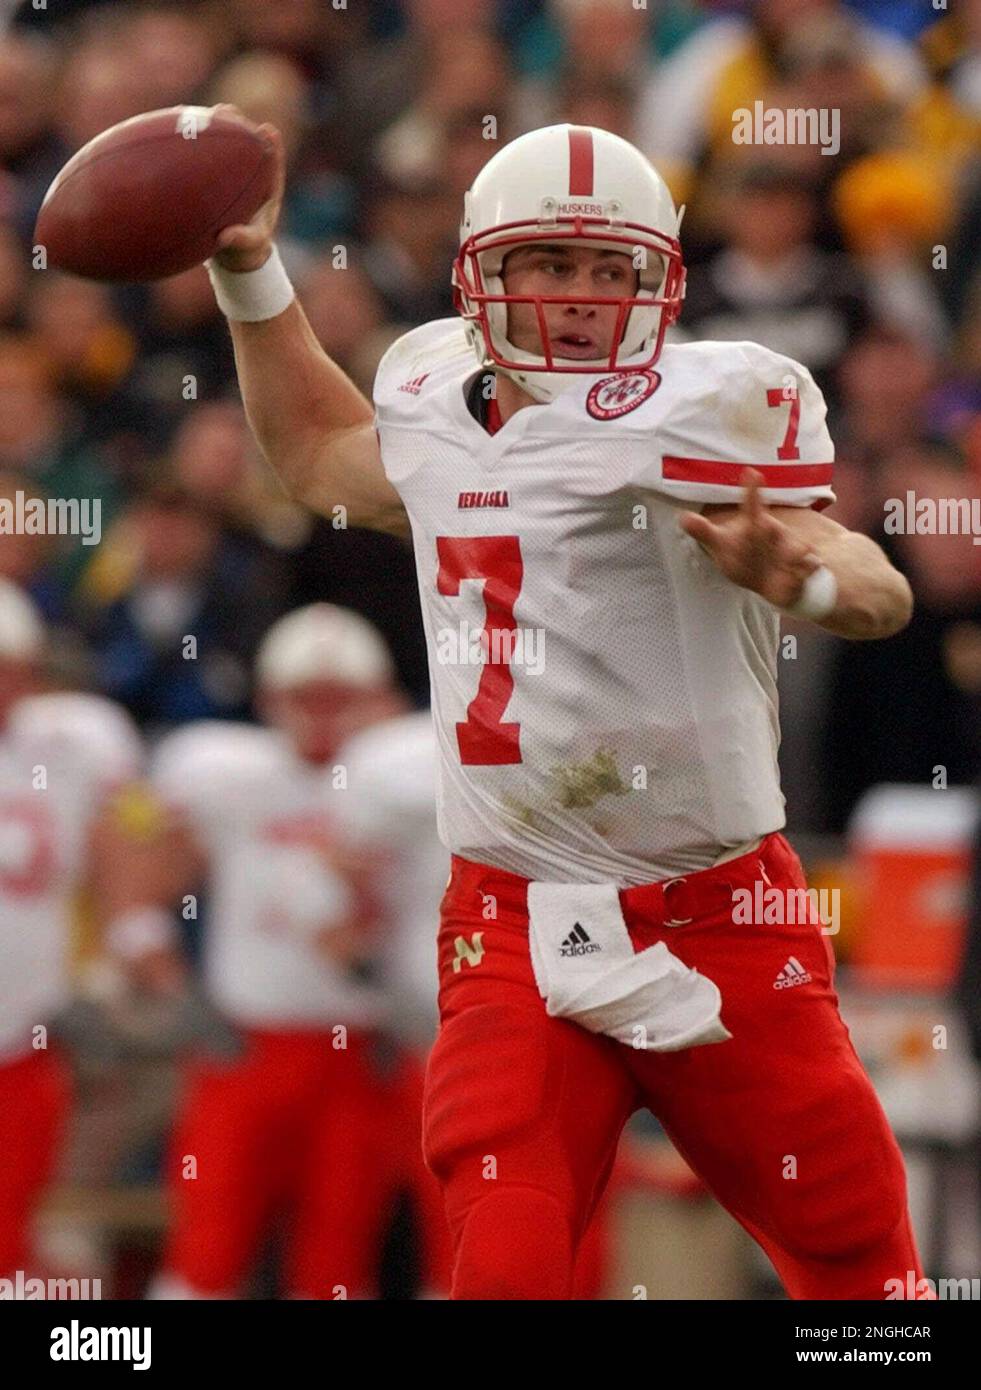 https://c8.alamy.com/comp/2NGHCAR/nebraska-quarterback-eric-crouch-rolls-out-to-pass-during-the-third-quarter-of-nebraskas-62-36-loss-to-colorado-in-a-big-12-game-in-boulder-colo-on-friday-nov-23-2001-crouch-ran-away-with-the-award-for-the-associated-press-big-12-offensive-player-of-the-year-ap-photodavid-zalubowski-2NGHCAR.jpg